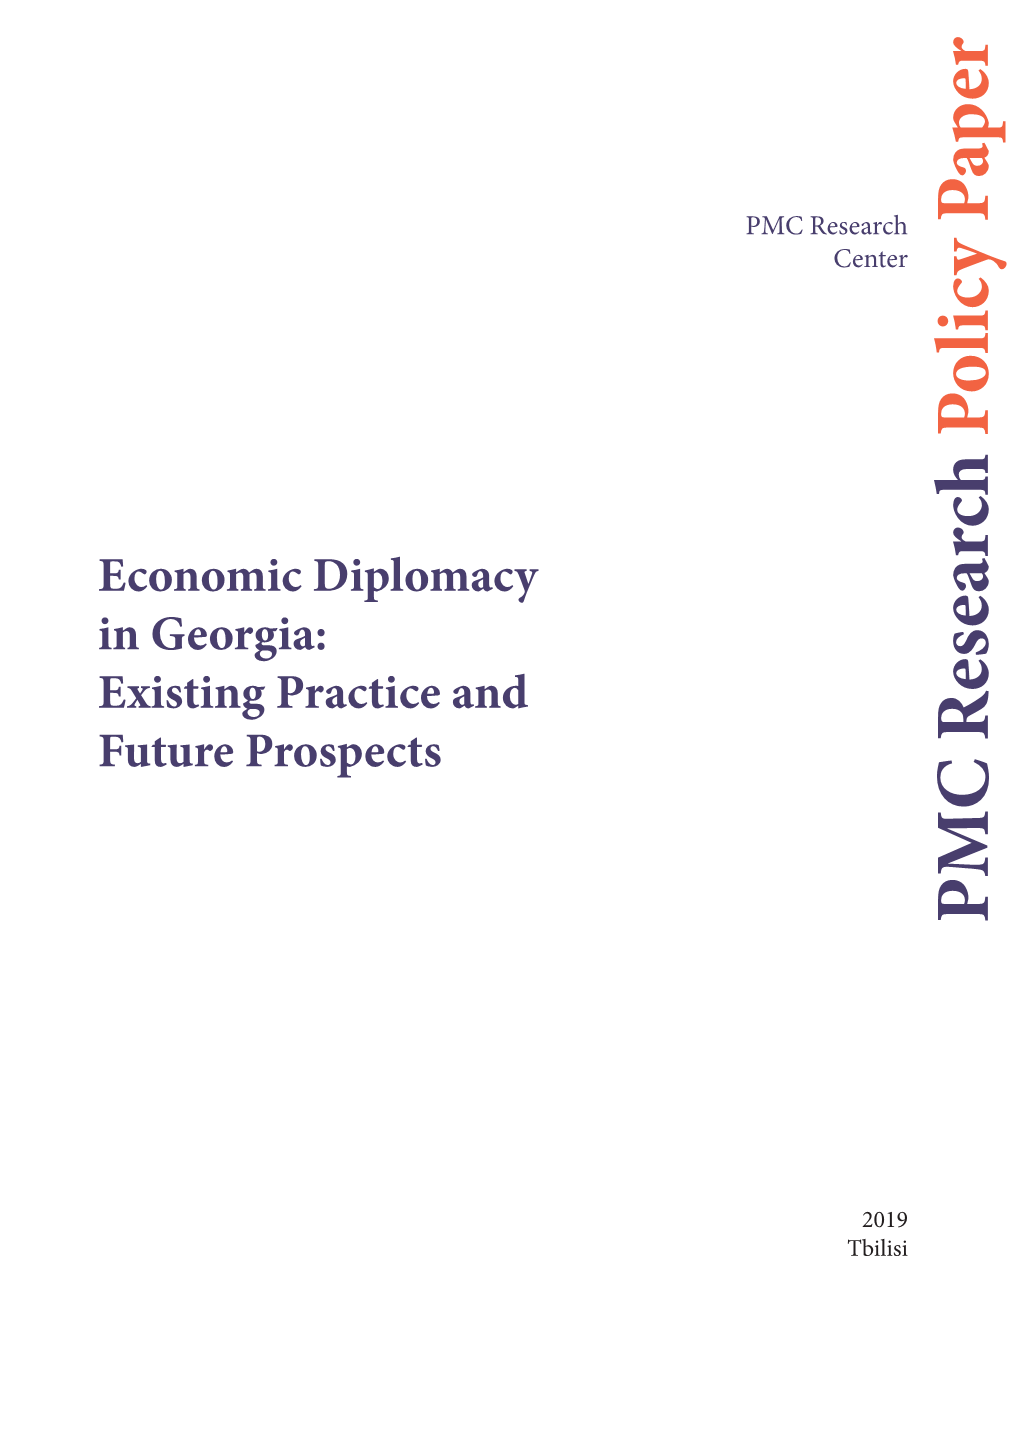 Economic Diplomacy in Georgia: Existing Practice and Future Prospects PMC Research Research PMC